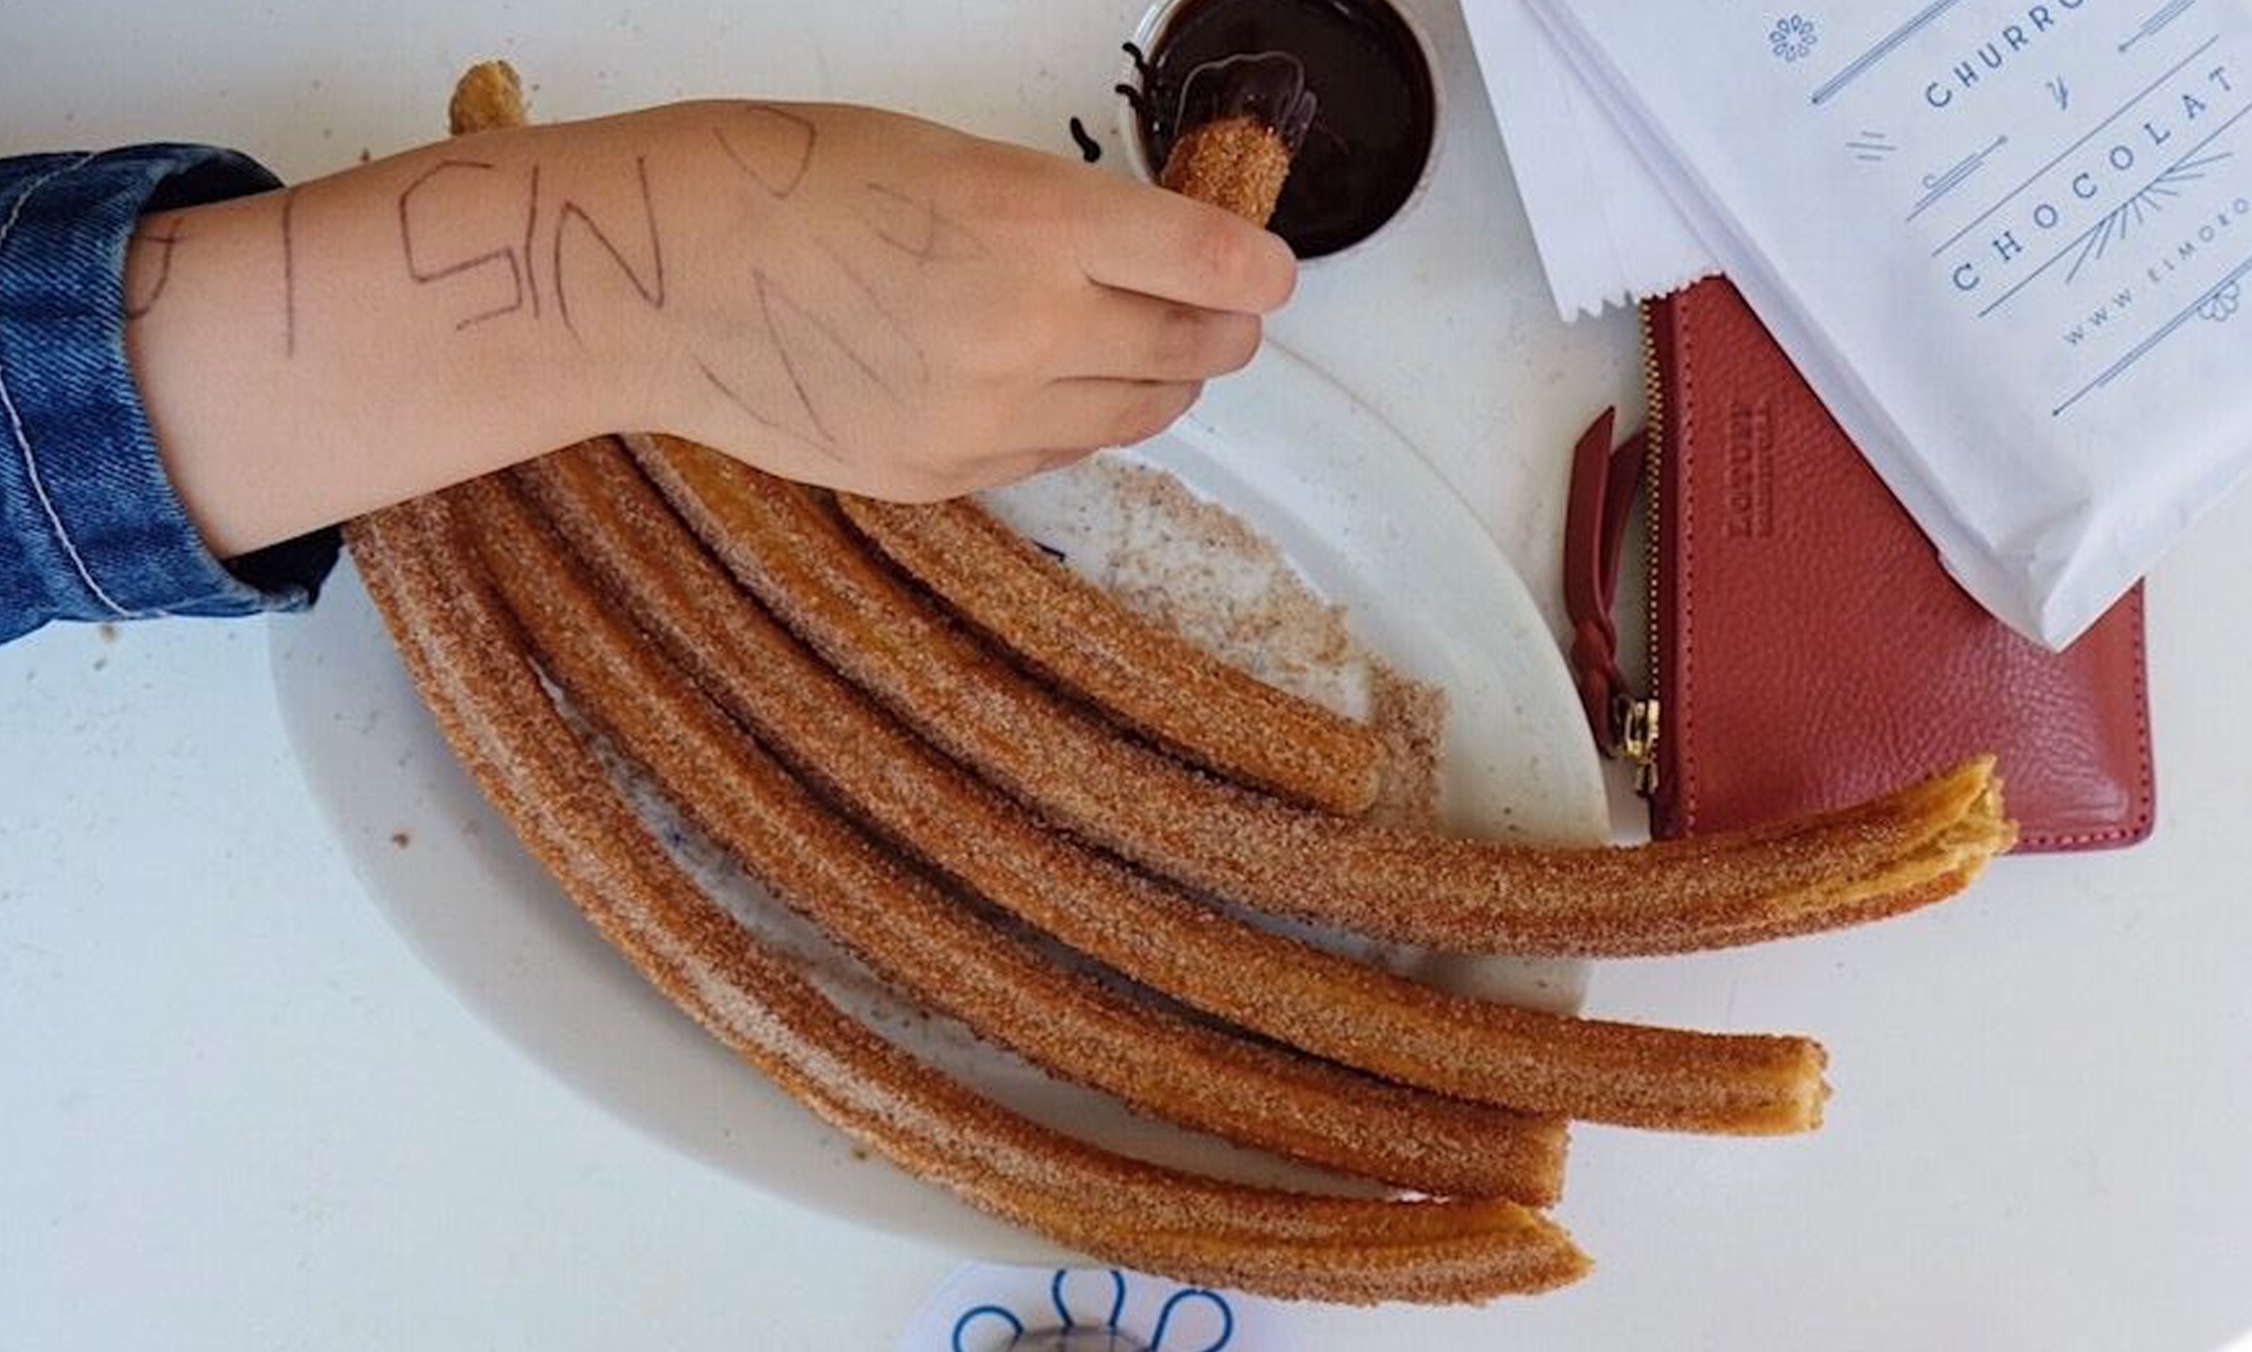 Churros, of course!